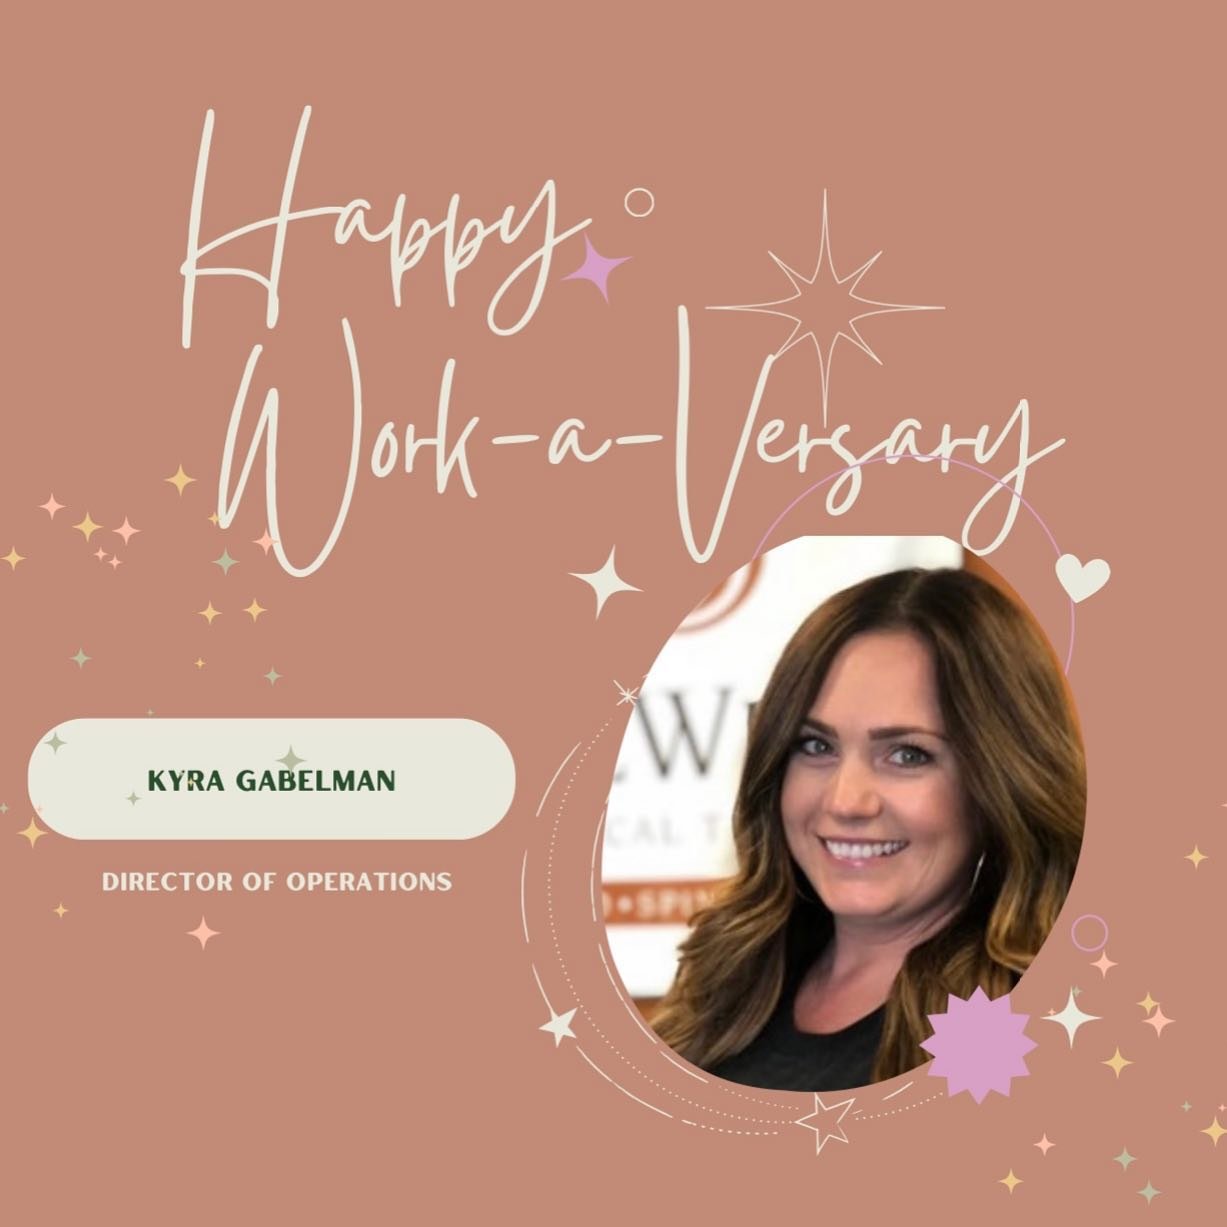 Happy work-a-versary to our incredible Director of Operations, Kyra! 

11 years ago, Kyra started as a part-time patient coordinator and has seen our business grow from our earliest version. Along the way she has helped shape DeWitt PT into what it i